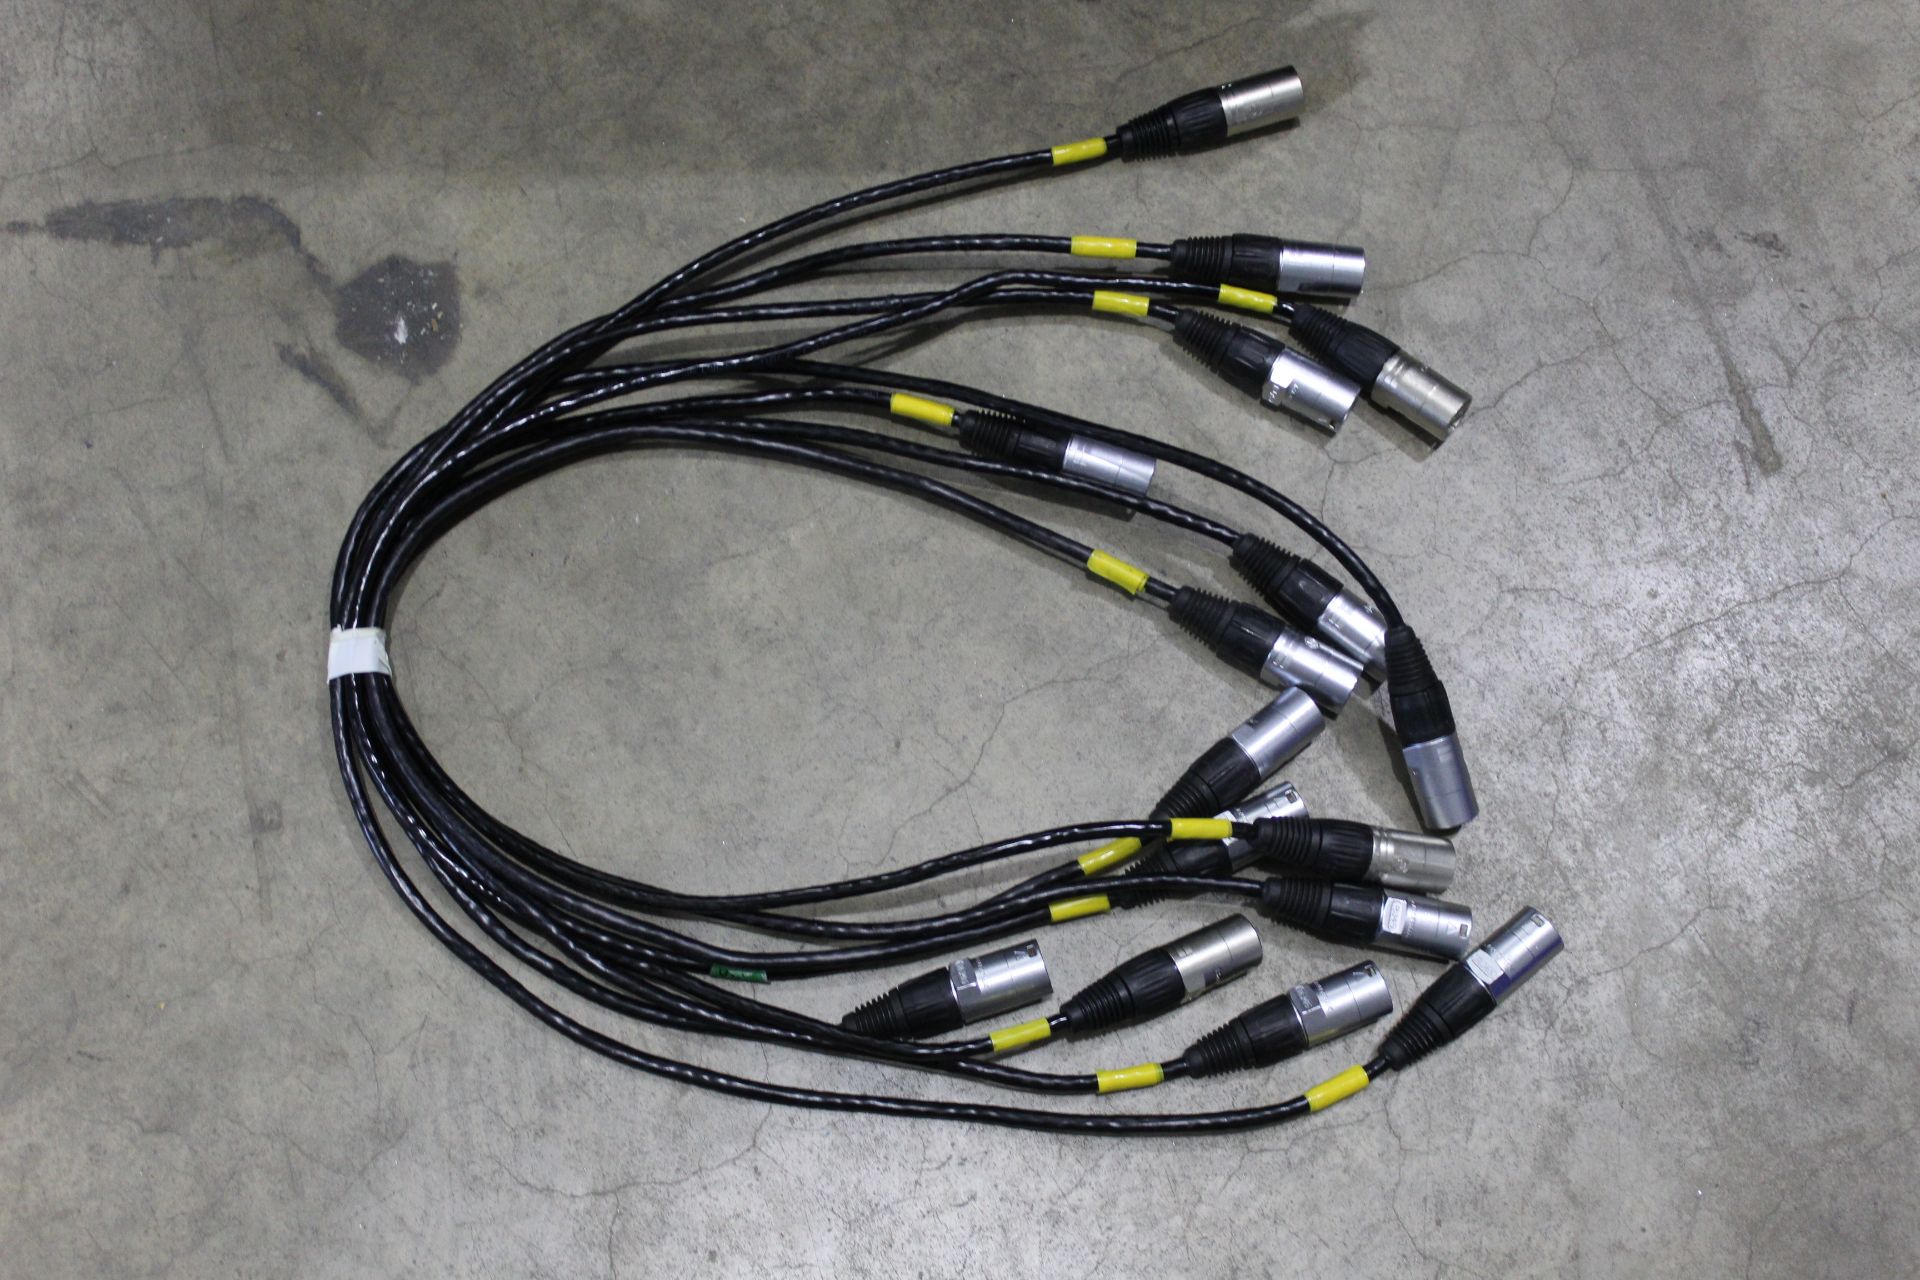 Approx. 284x 0.9m CAT5 cables in 600mm x 400mm plastic tote bin used for P2.6 LED display. (PLEASE - Image 2 of 2